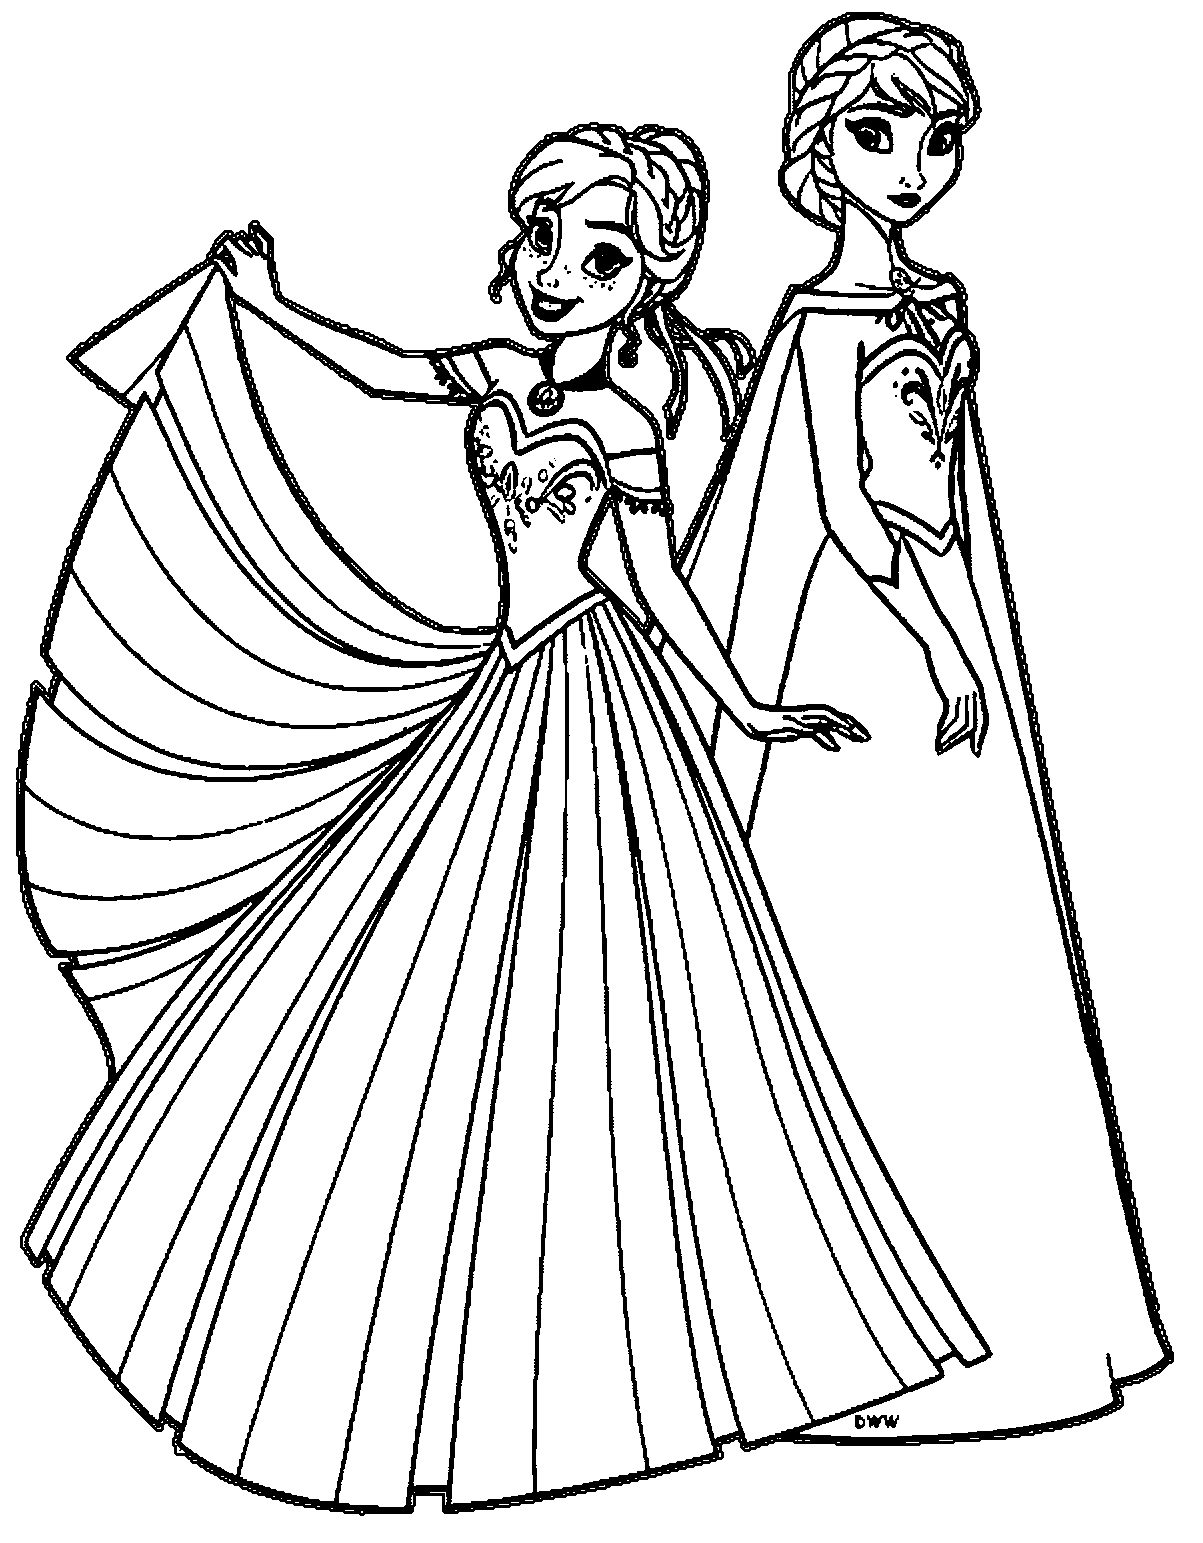 Elsa Anna Coloring Pages at GetDrawings | Free download